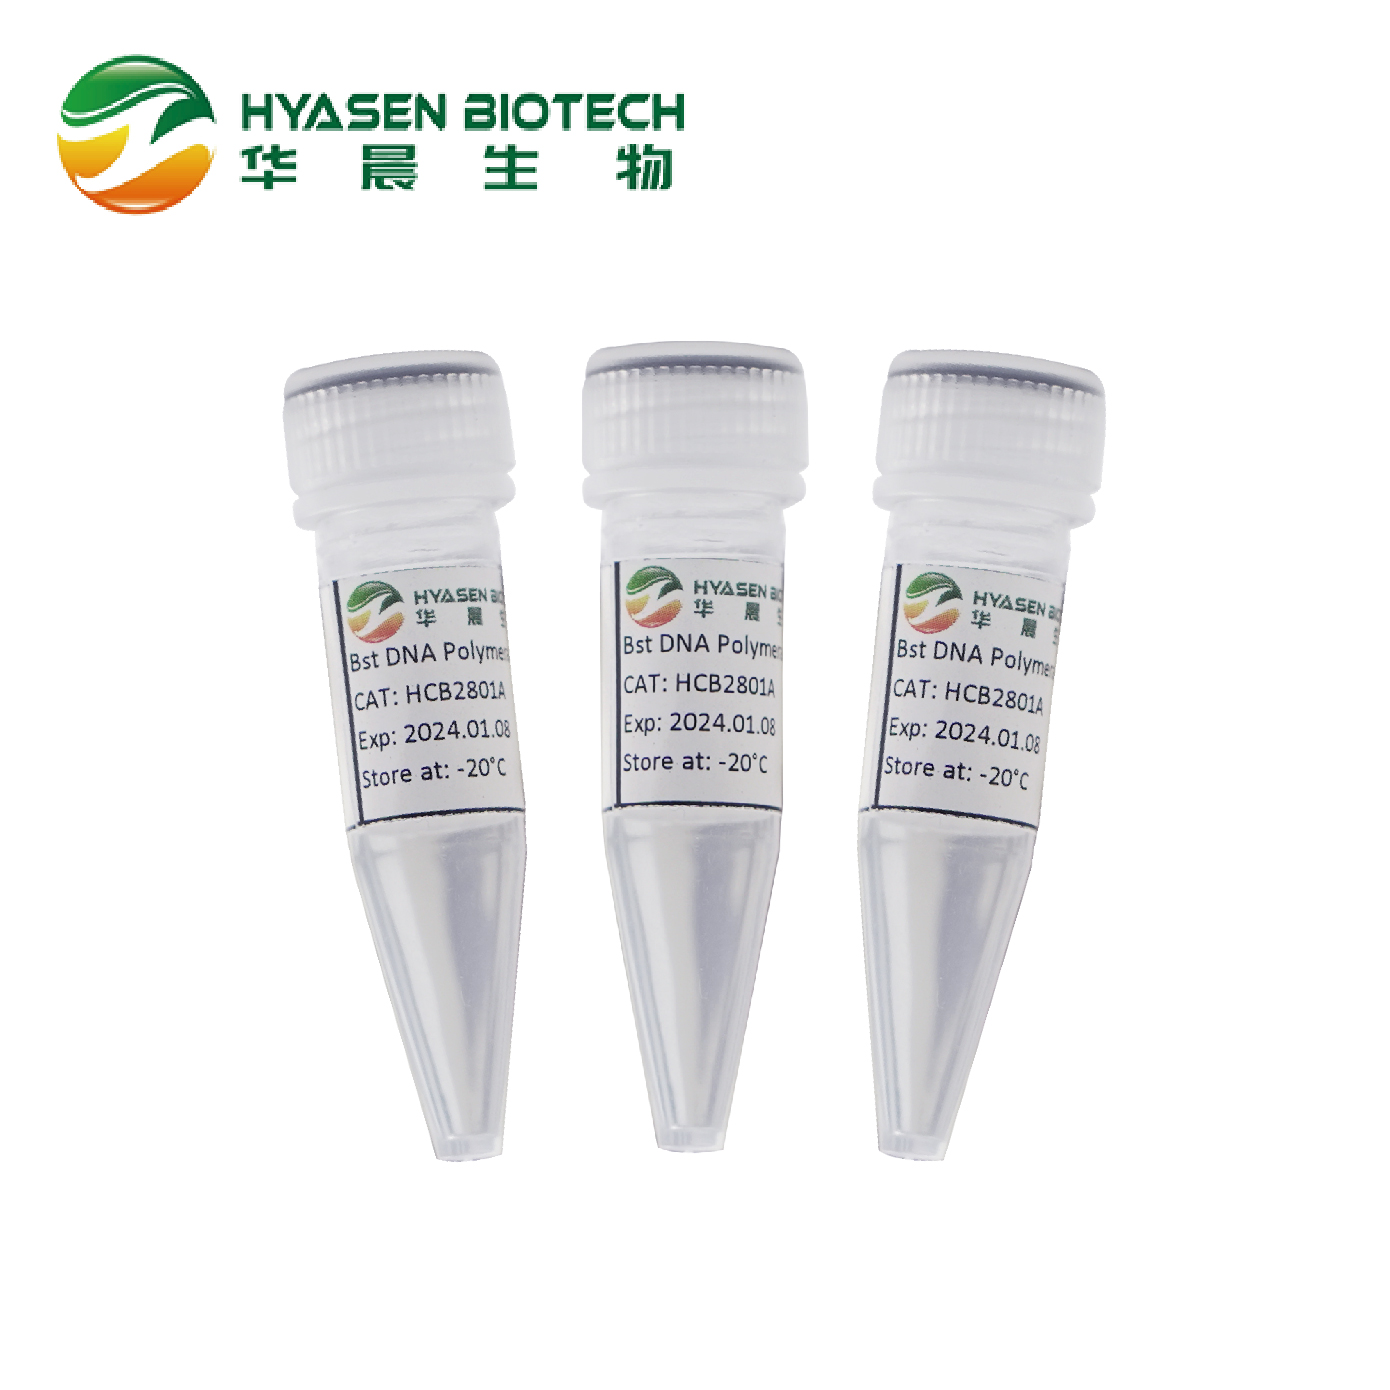 Bst 2.0 DNA Polymerase အင်ဇိုင်း၊ Isothermal Amplification